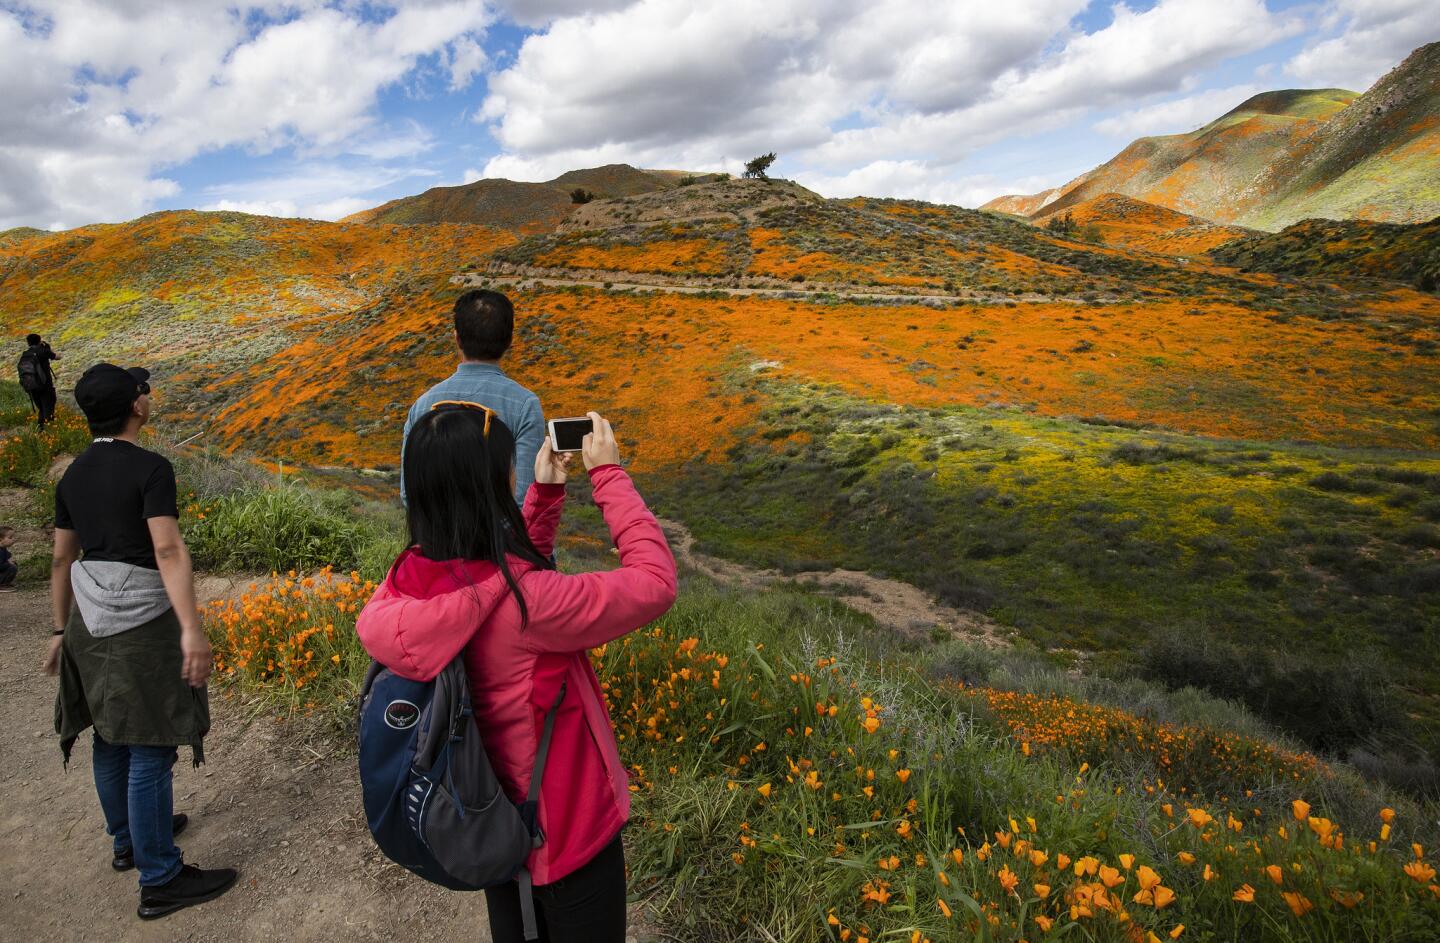 Poppies turn Lake Elsinore hillsides into a patchwork of orange hues.